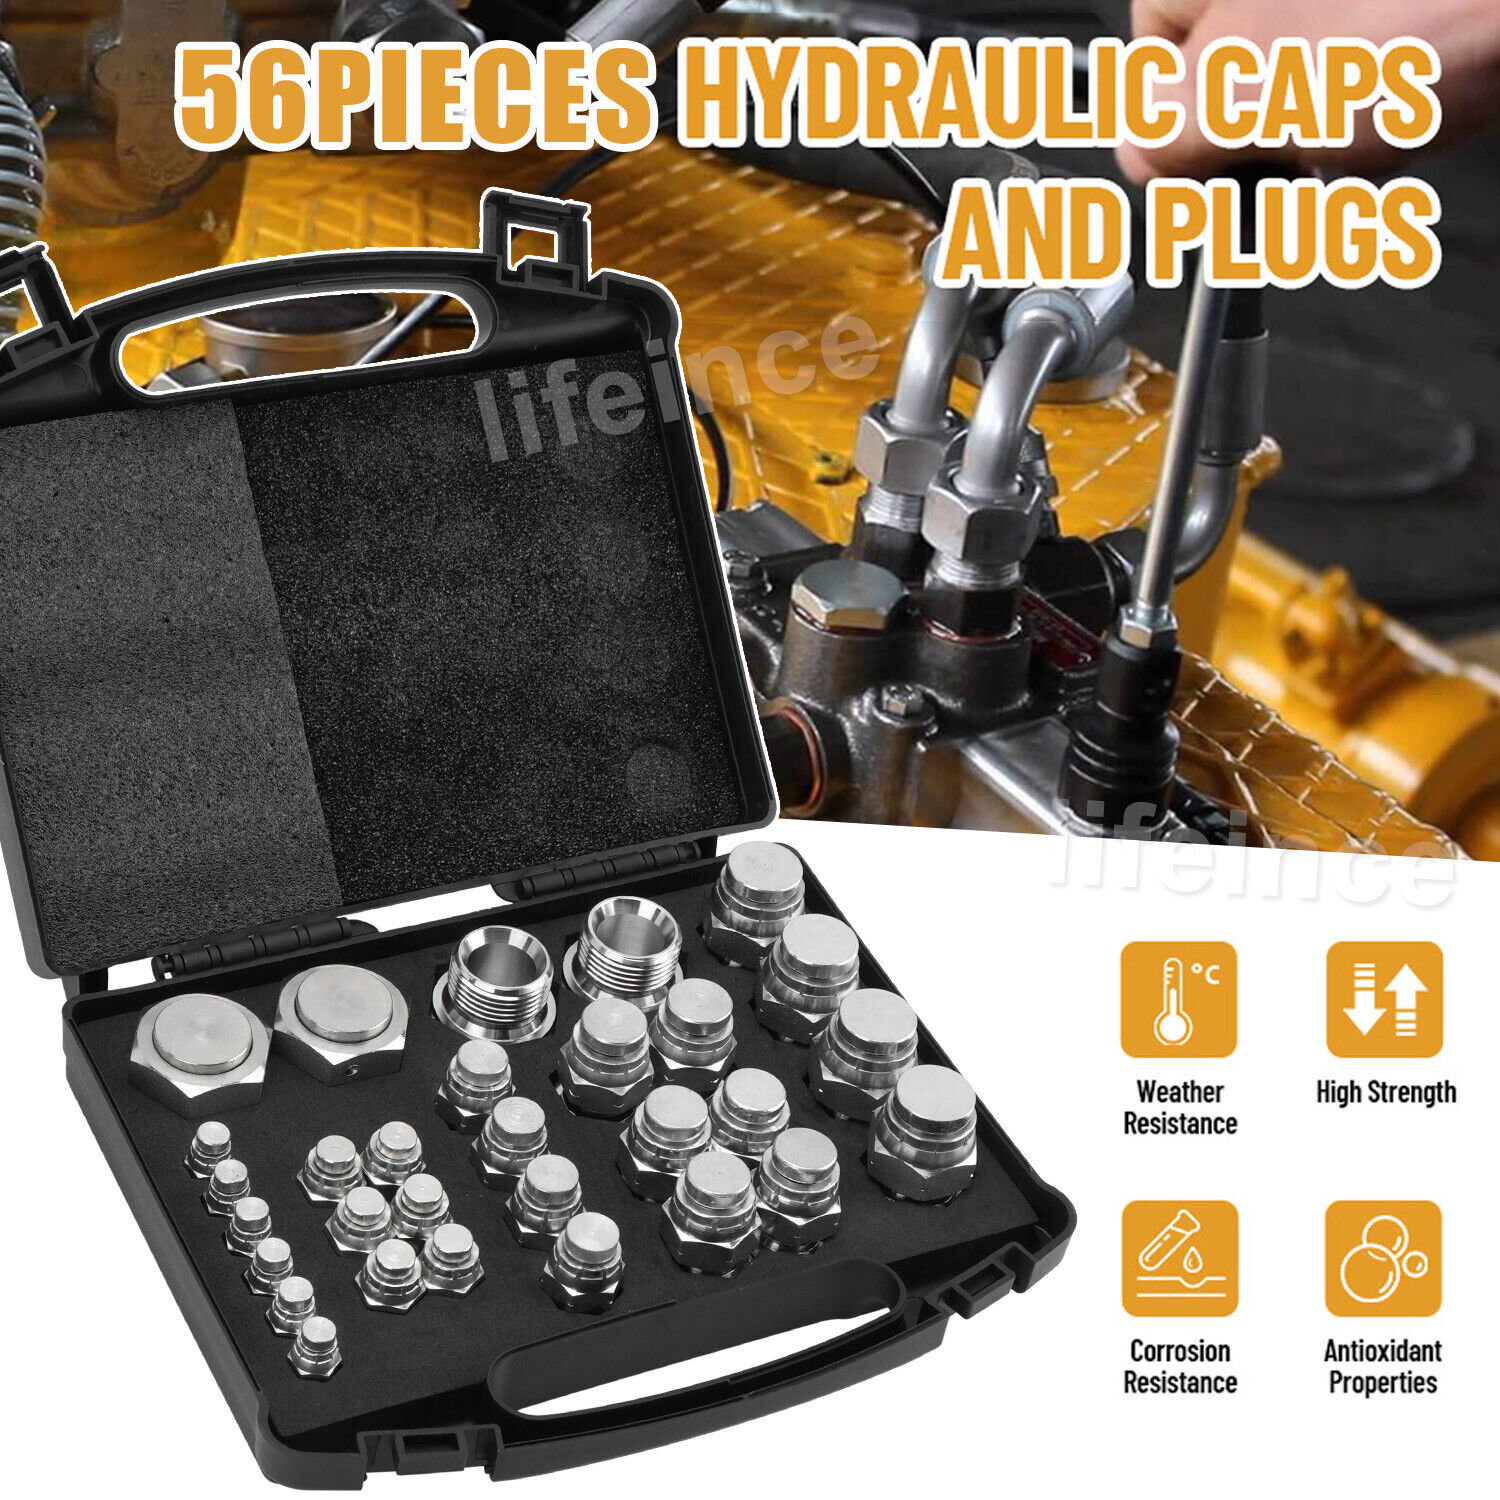 56Pieces BSPP Cap and Plug Kit Hydraulic Cap and Plug Kit W/ Precision Threading